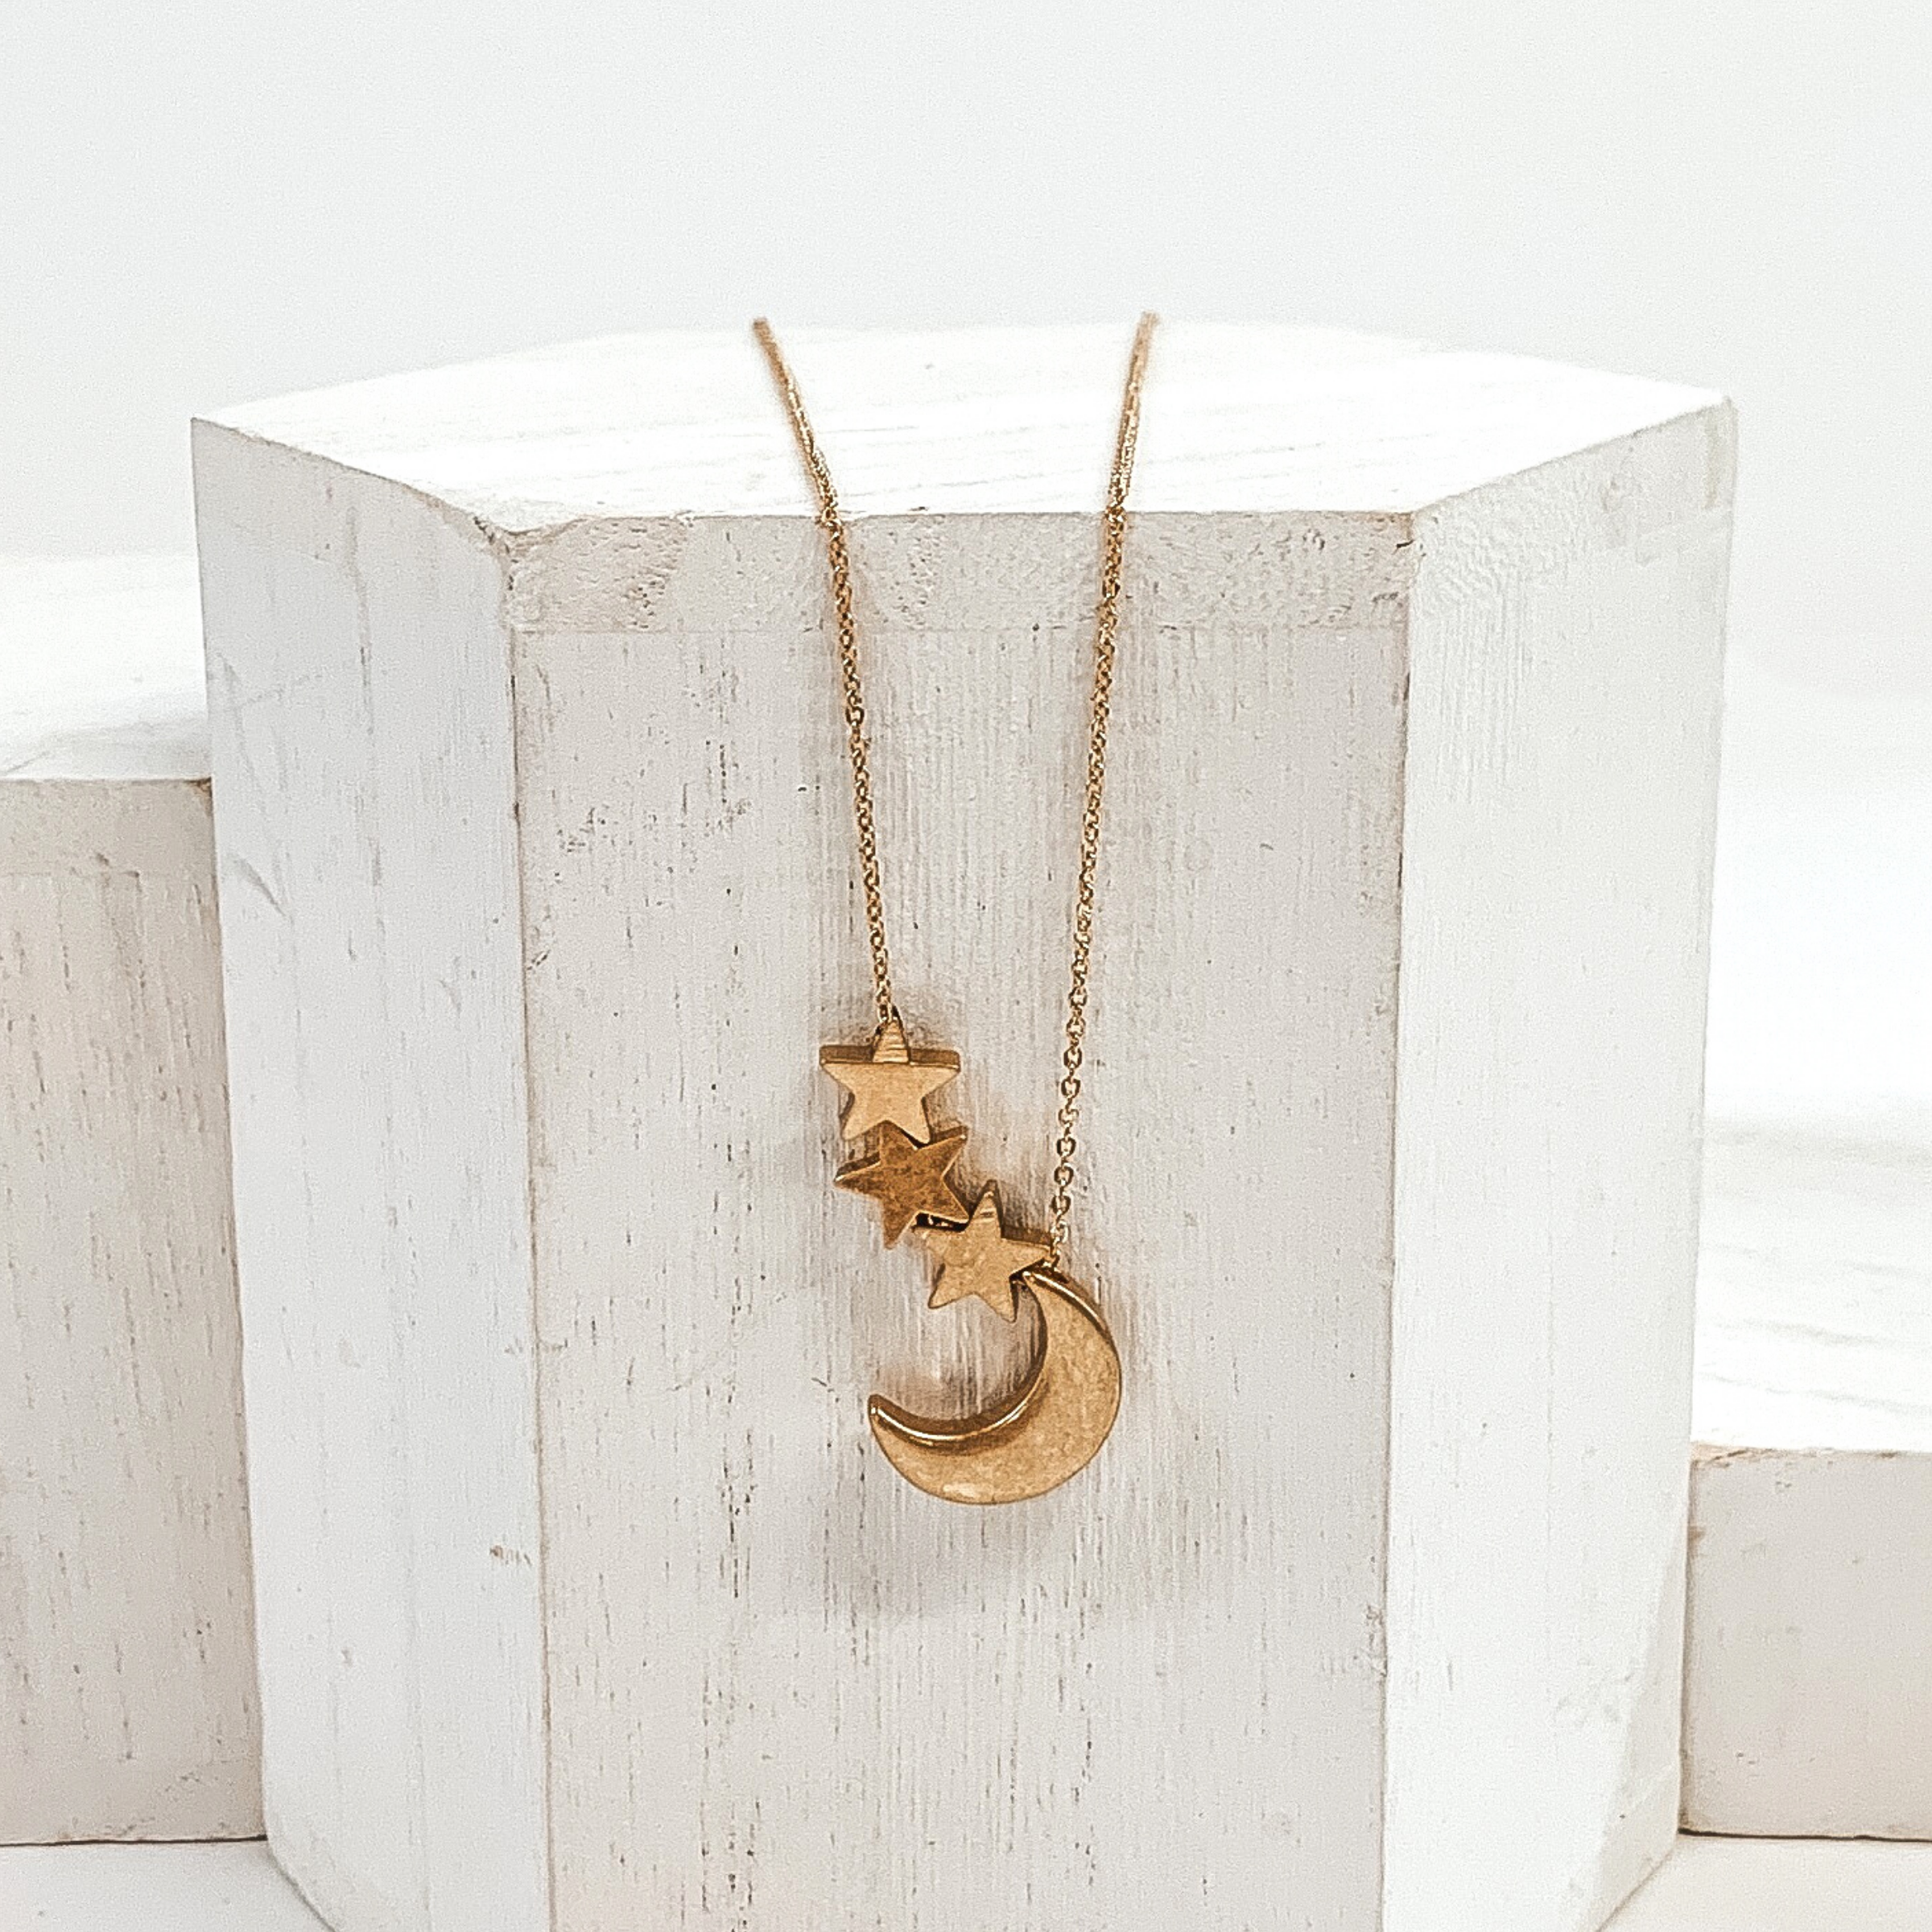 Simple gold necklace with gold moon charm and three gold star charms. This necklace is pictured on a white block on a white background.